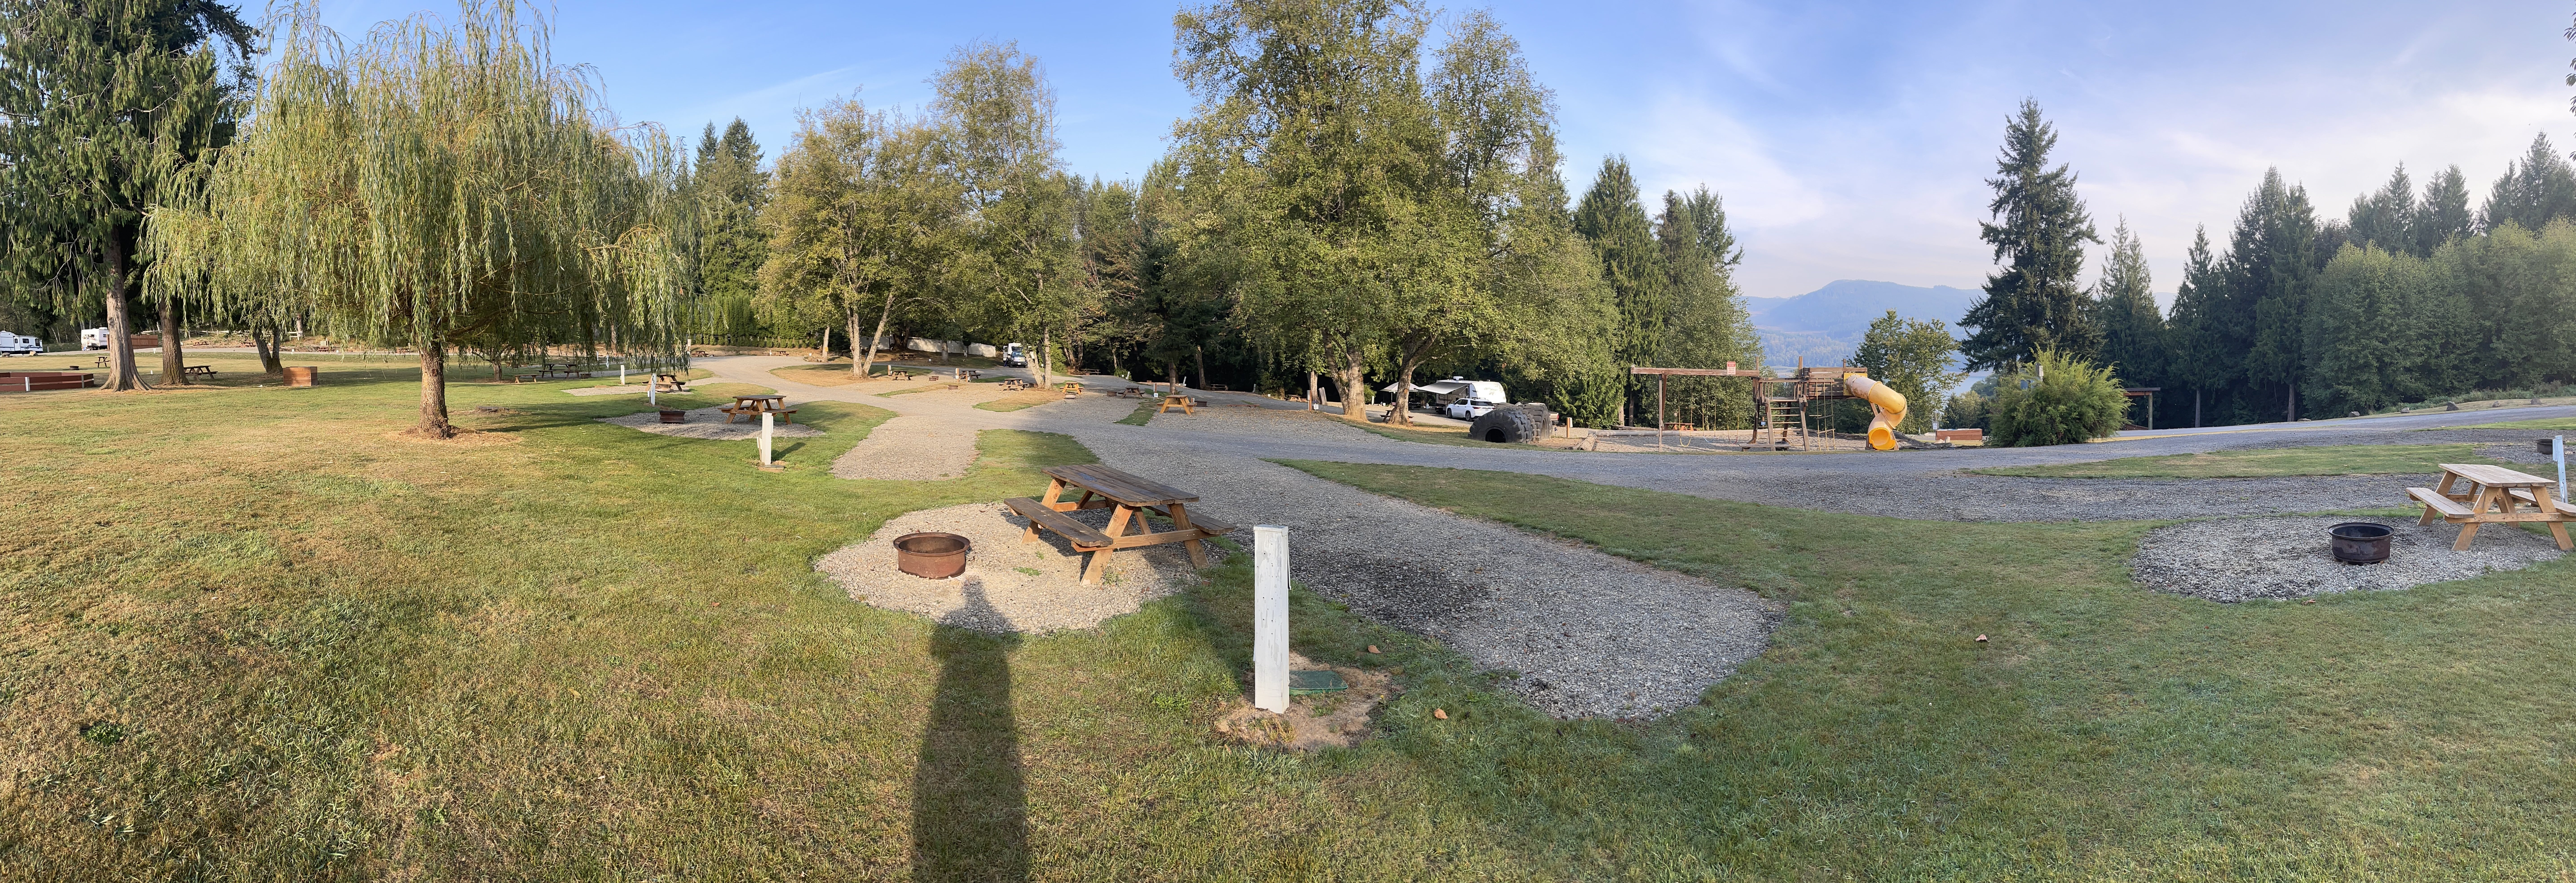 Camper submitted image from Riffe Lake Campground - 2